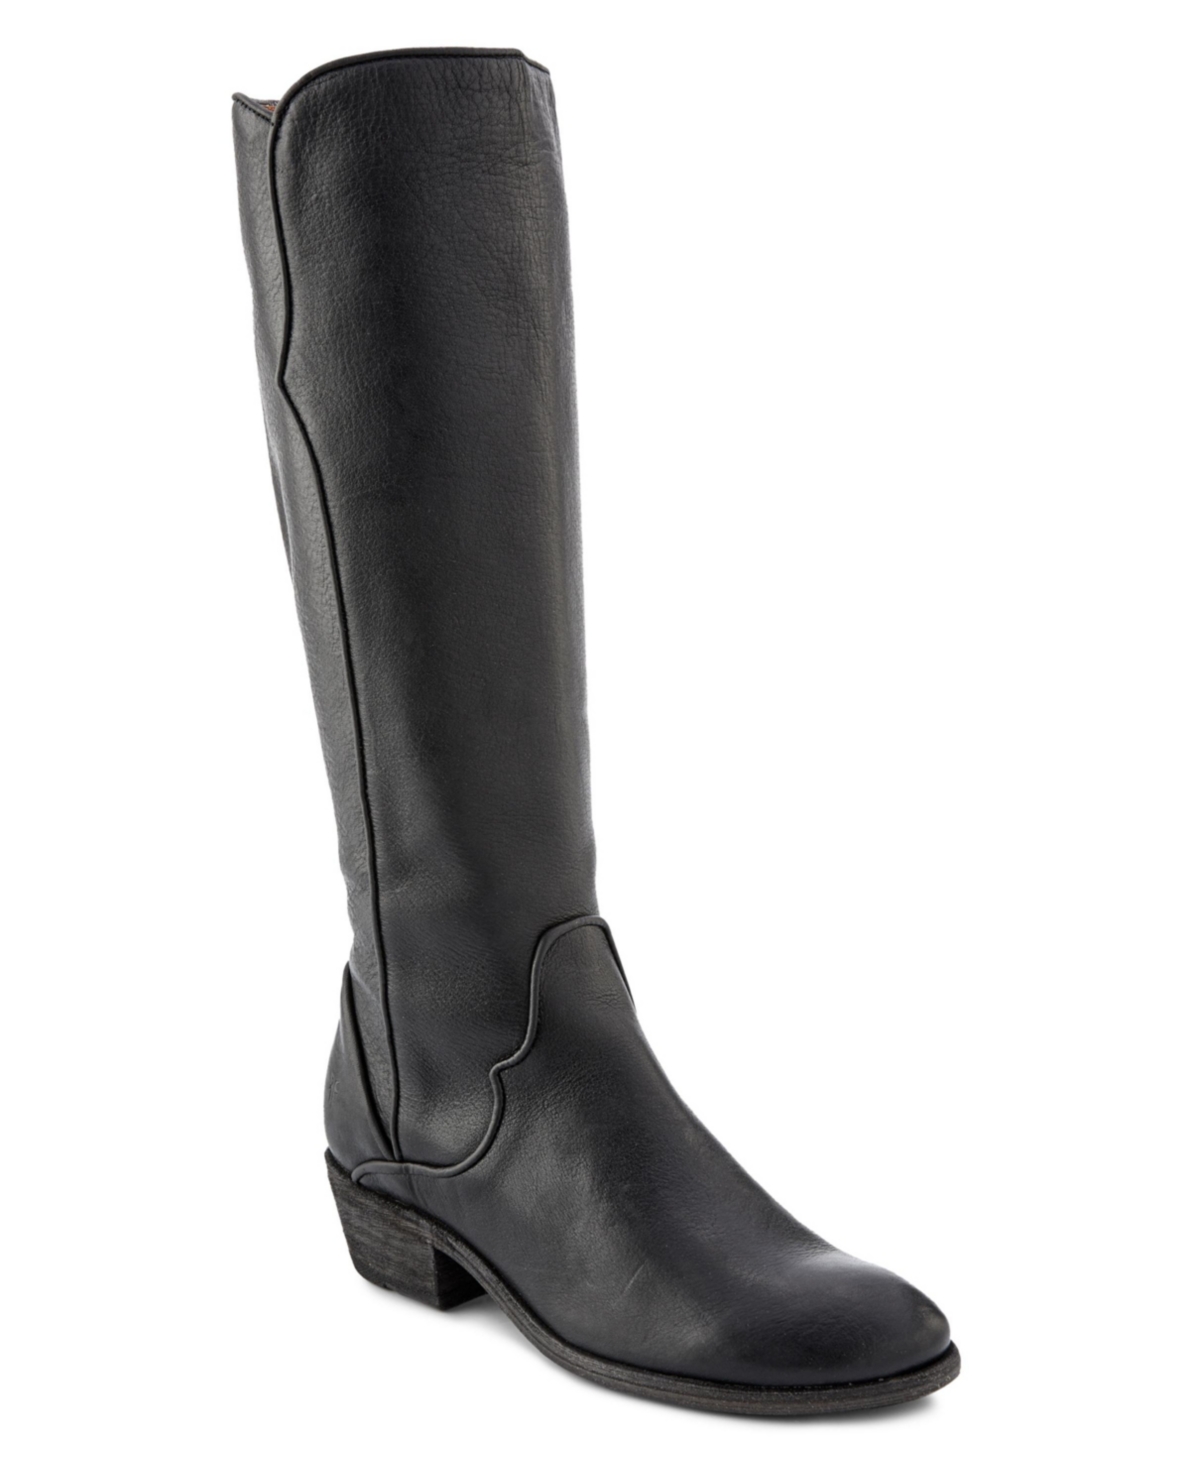 Women's Carson Piping Tall Boots - Black Leather